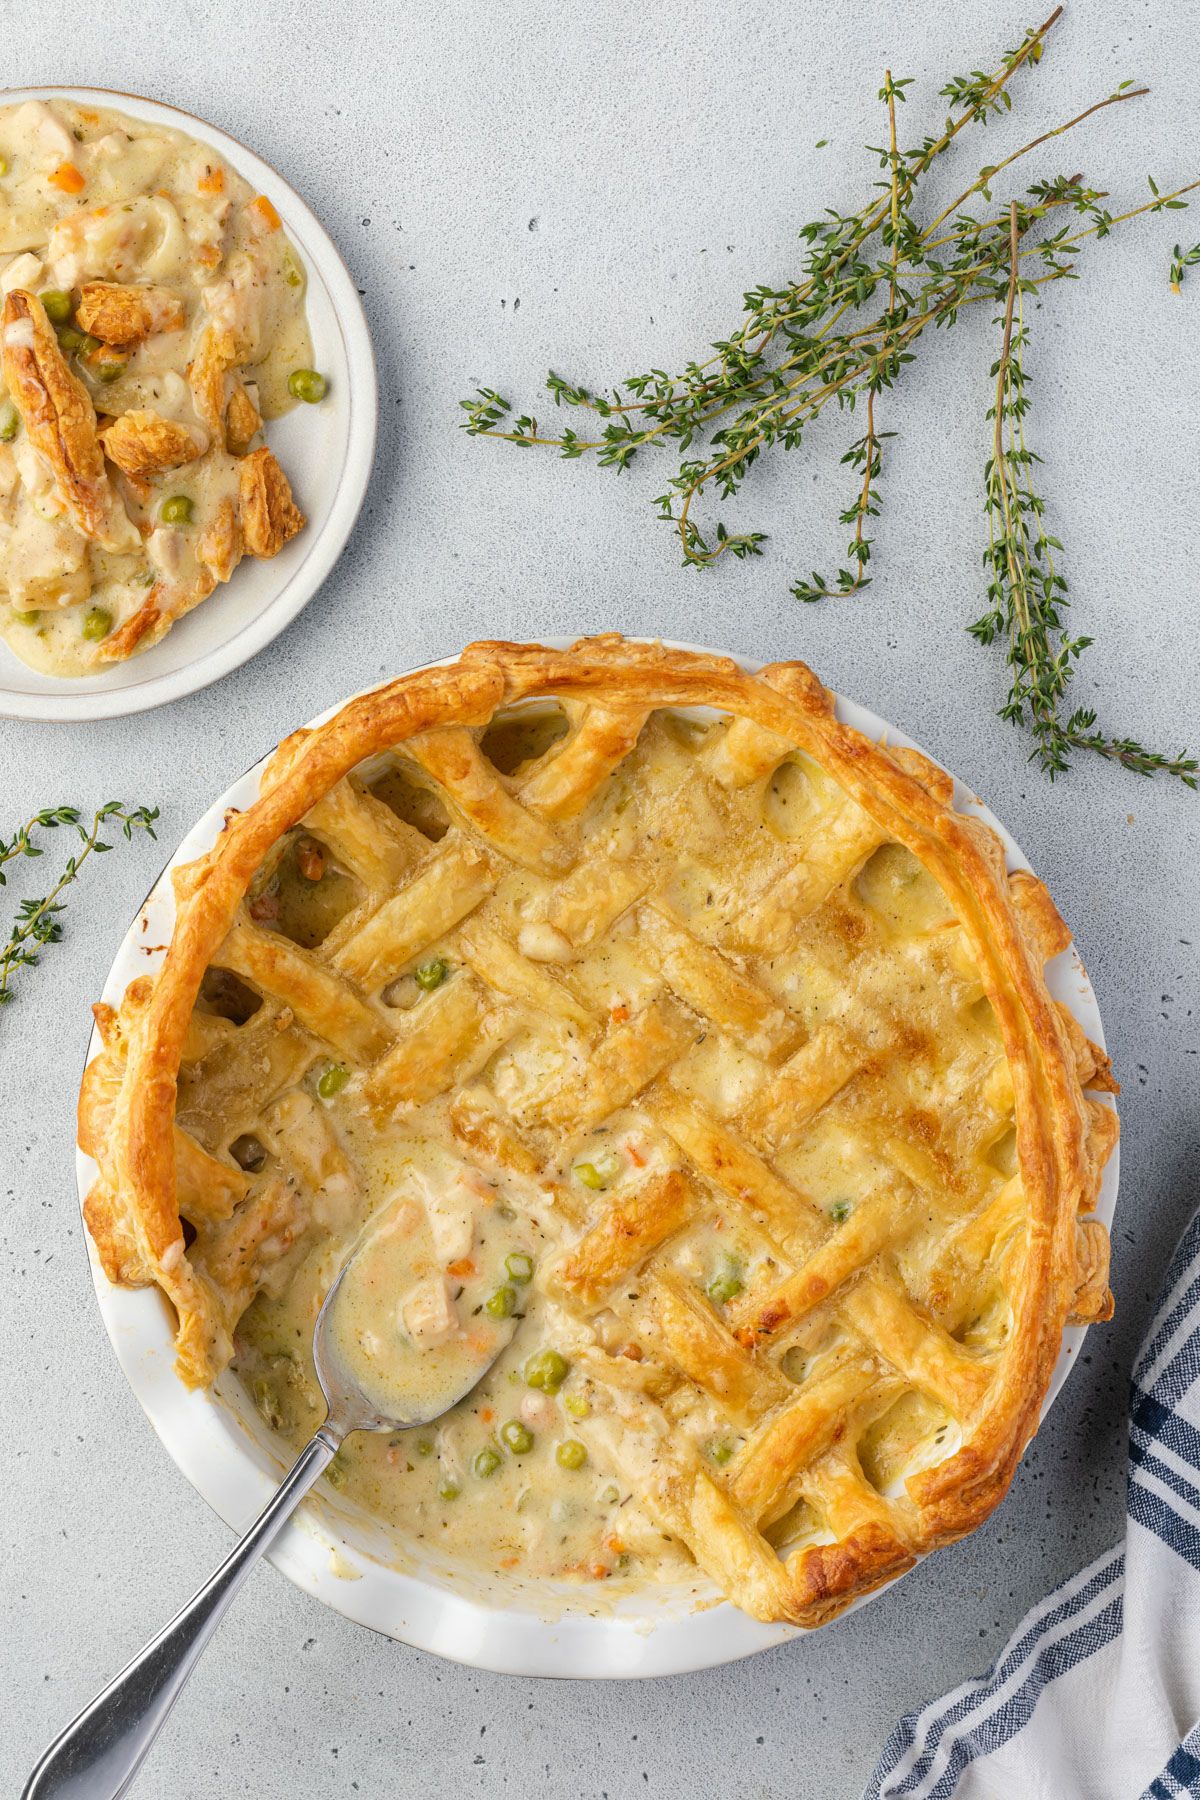 Baked pot pie with a lattice crust and a spoon scooping some out.